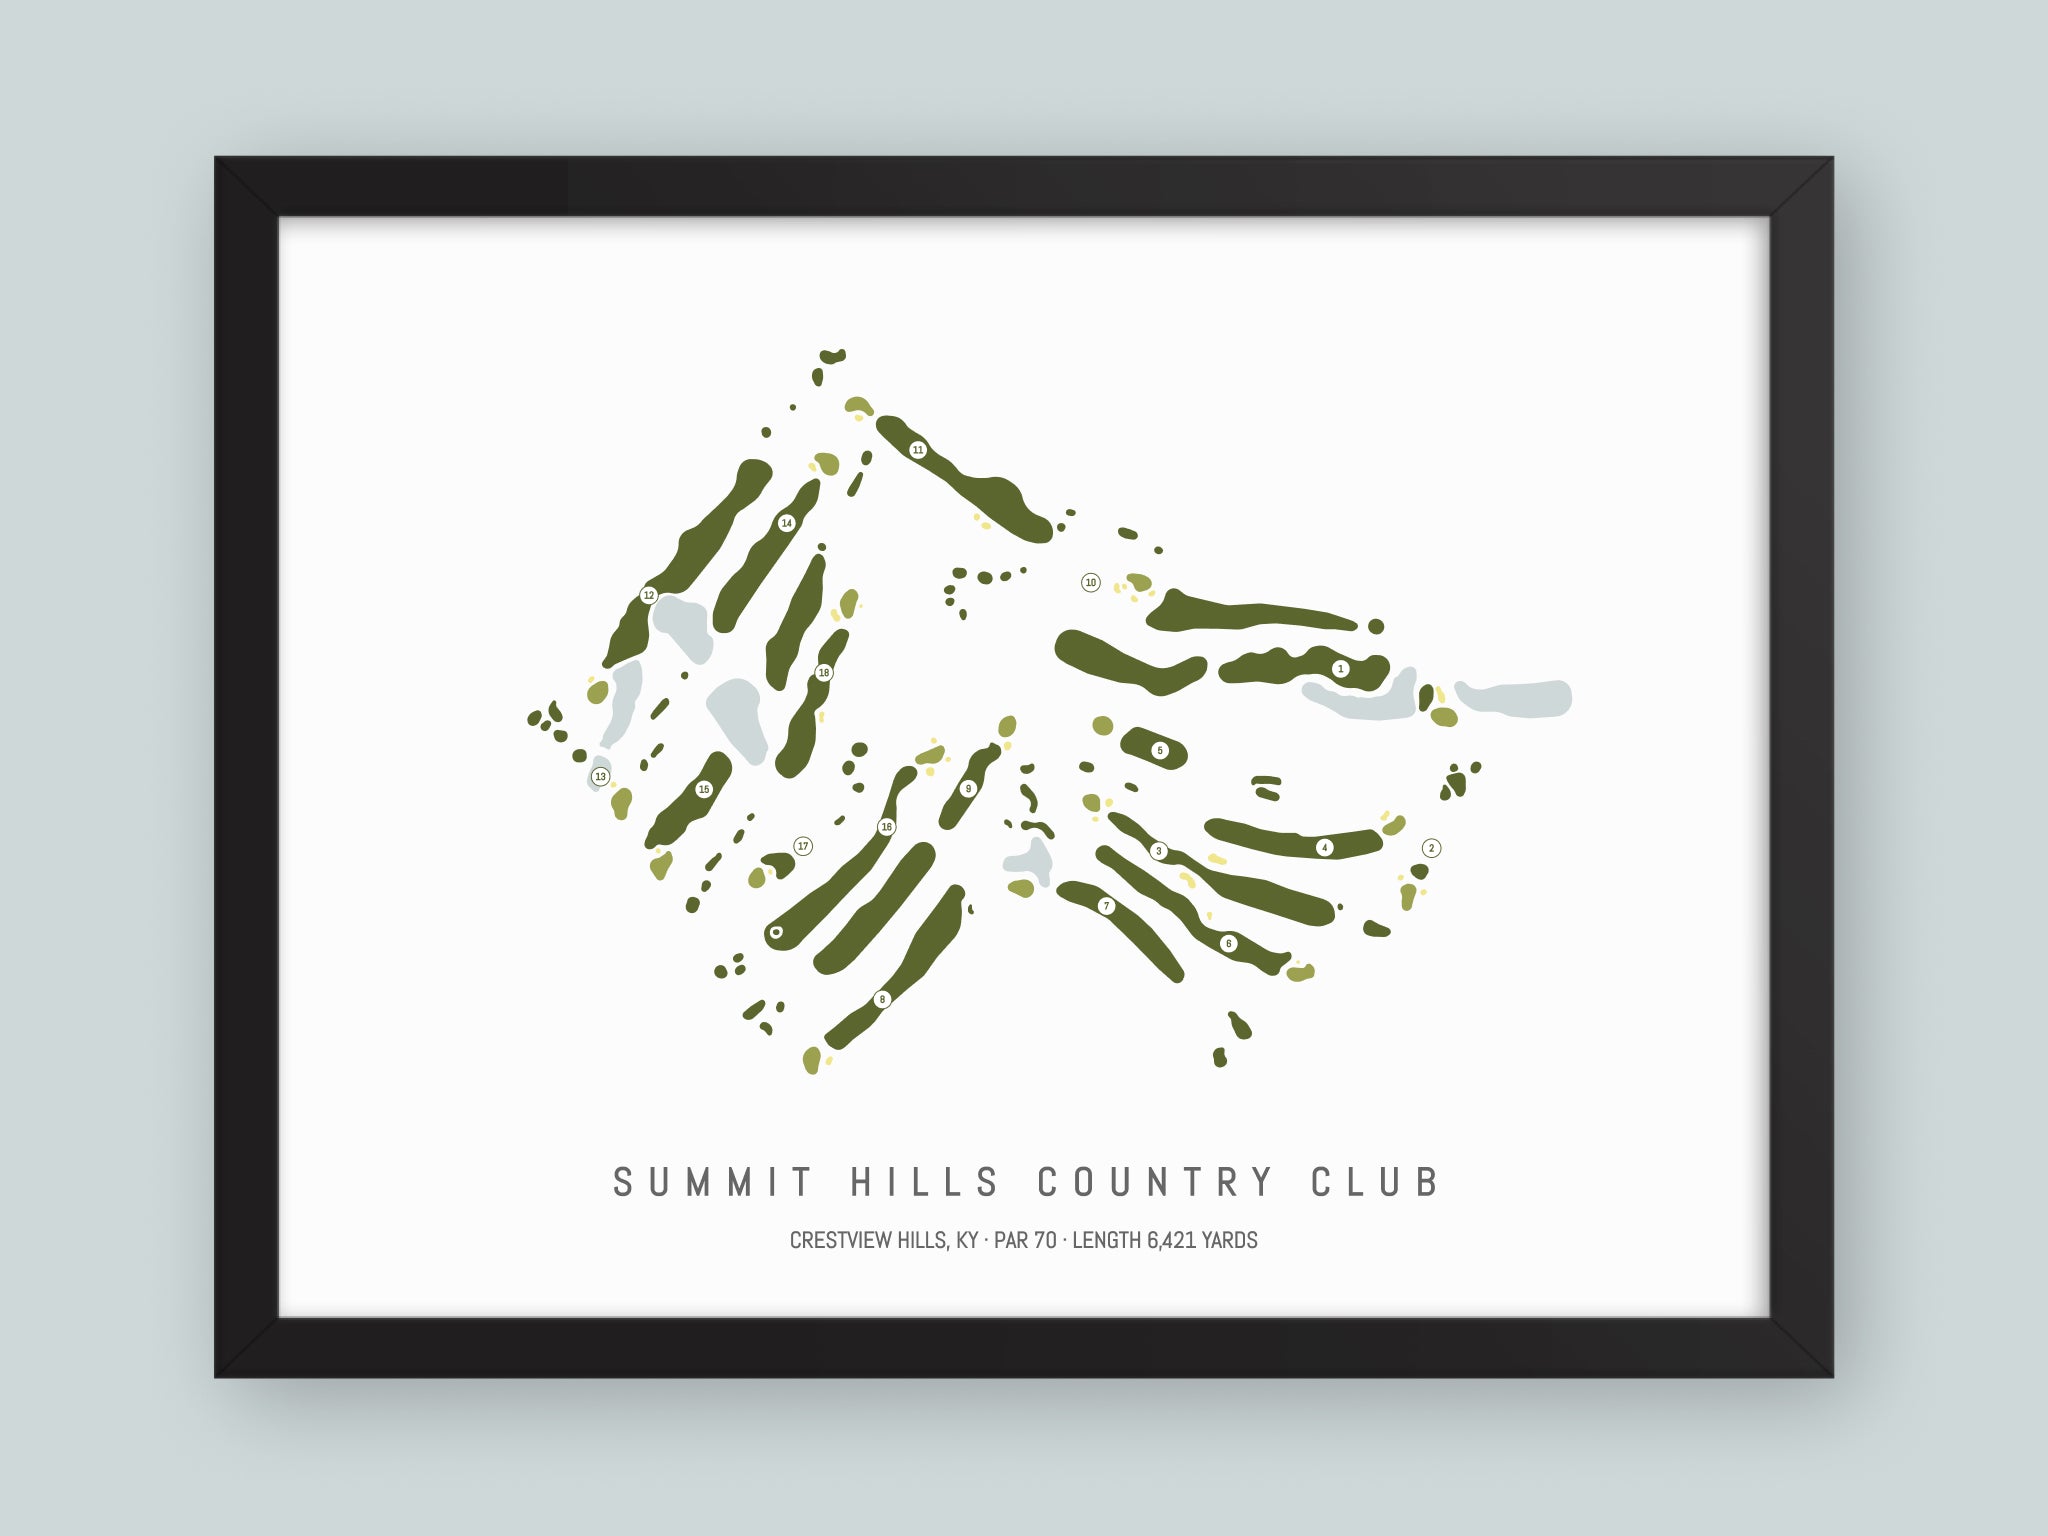 Summit-Hills-Country-Club-KY--Black-Frame-24x18-With-Hole-Numbers